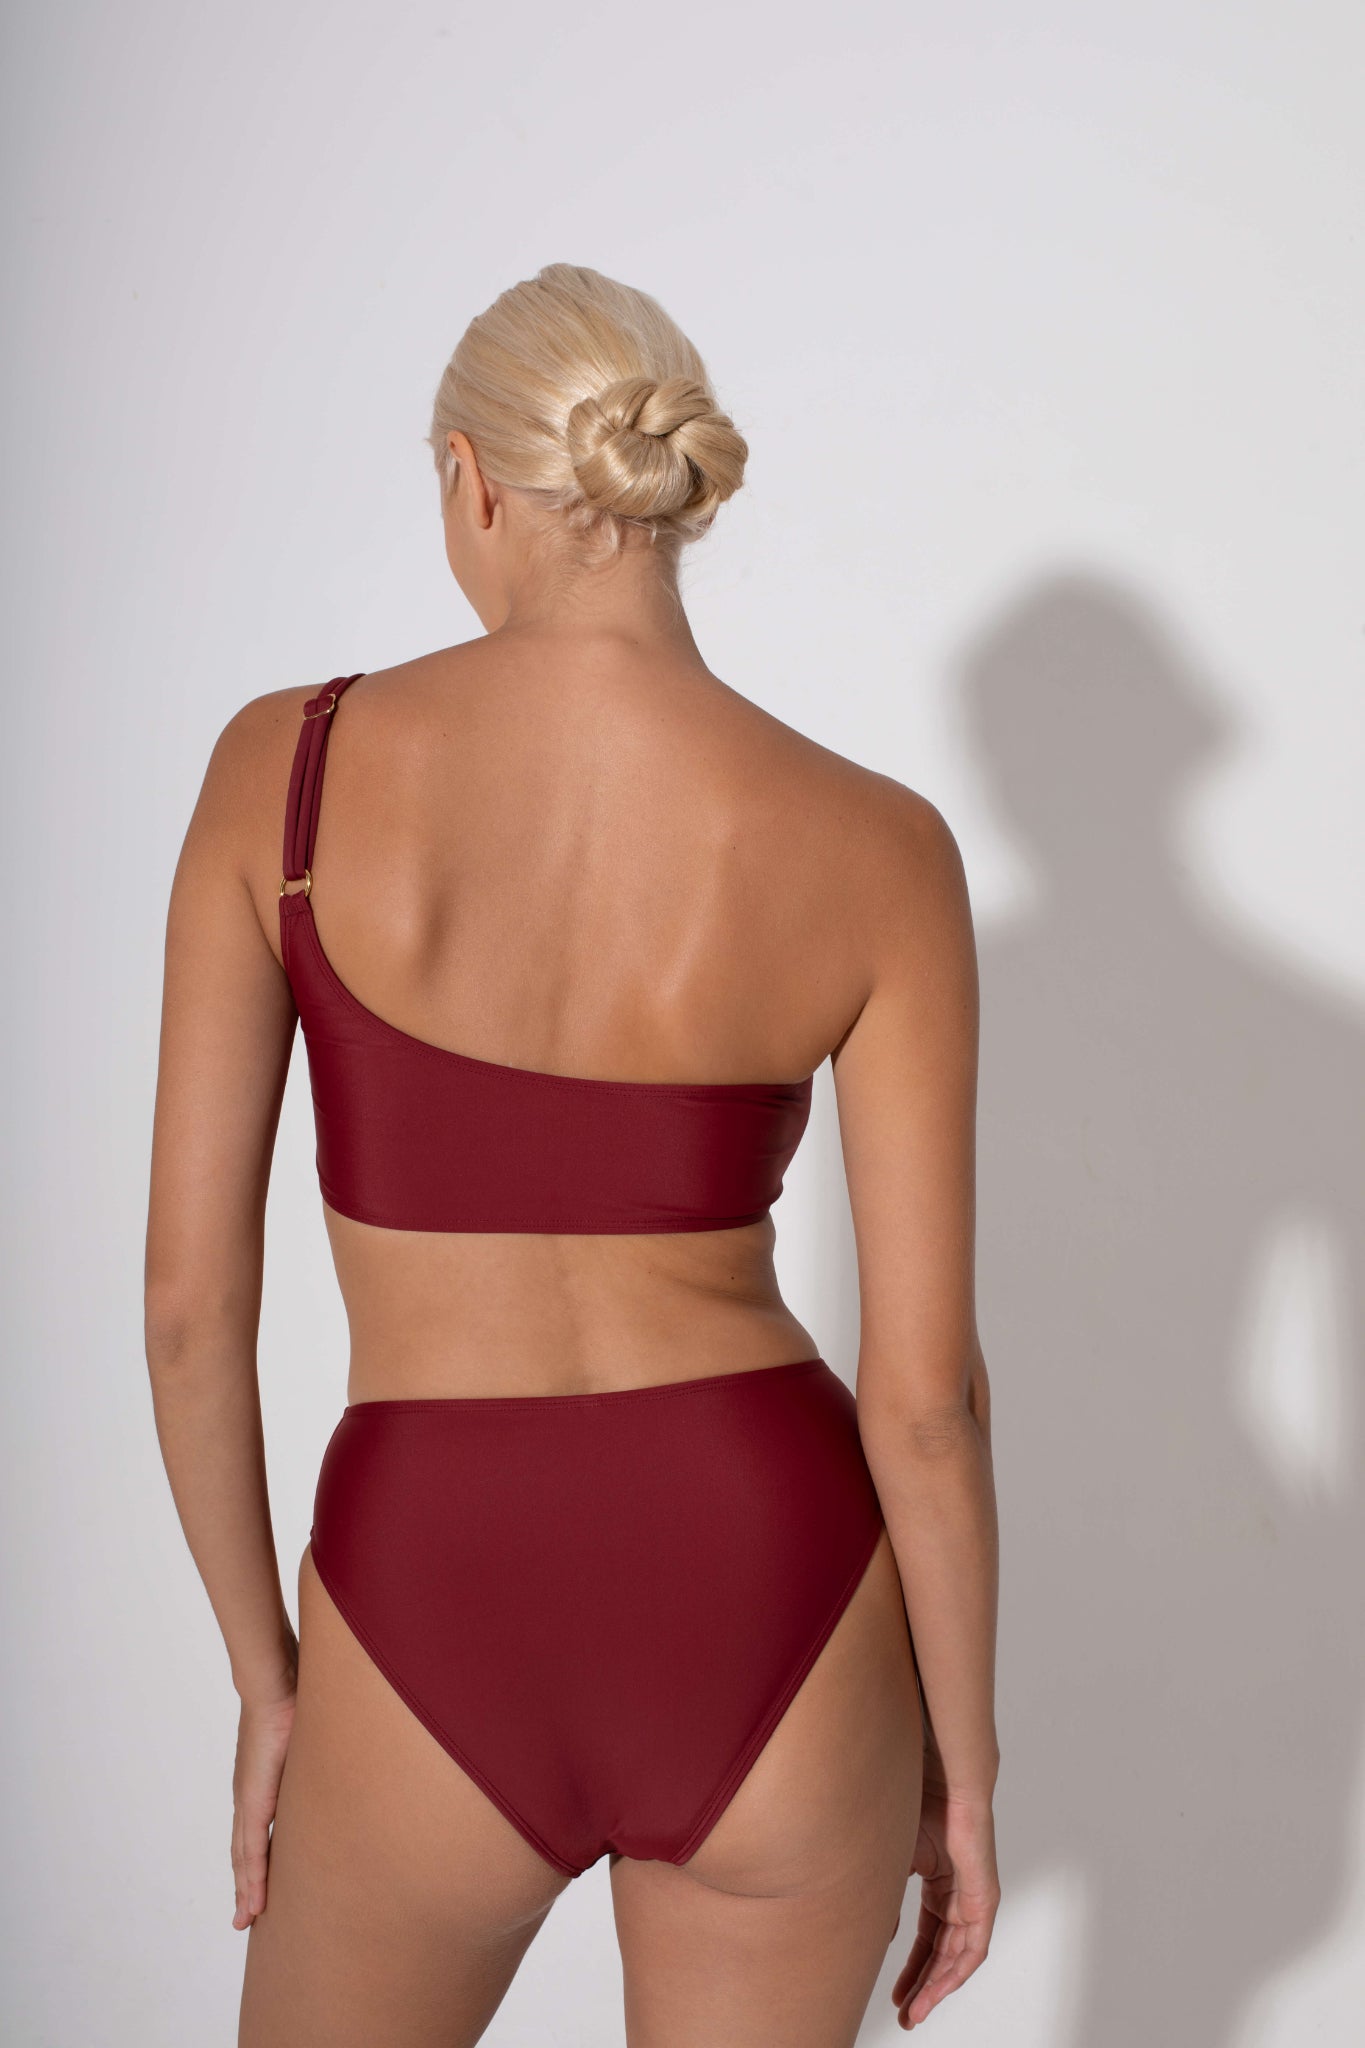 Comfortable one shoulder bra For High-Performance 